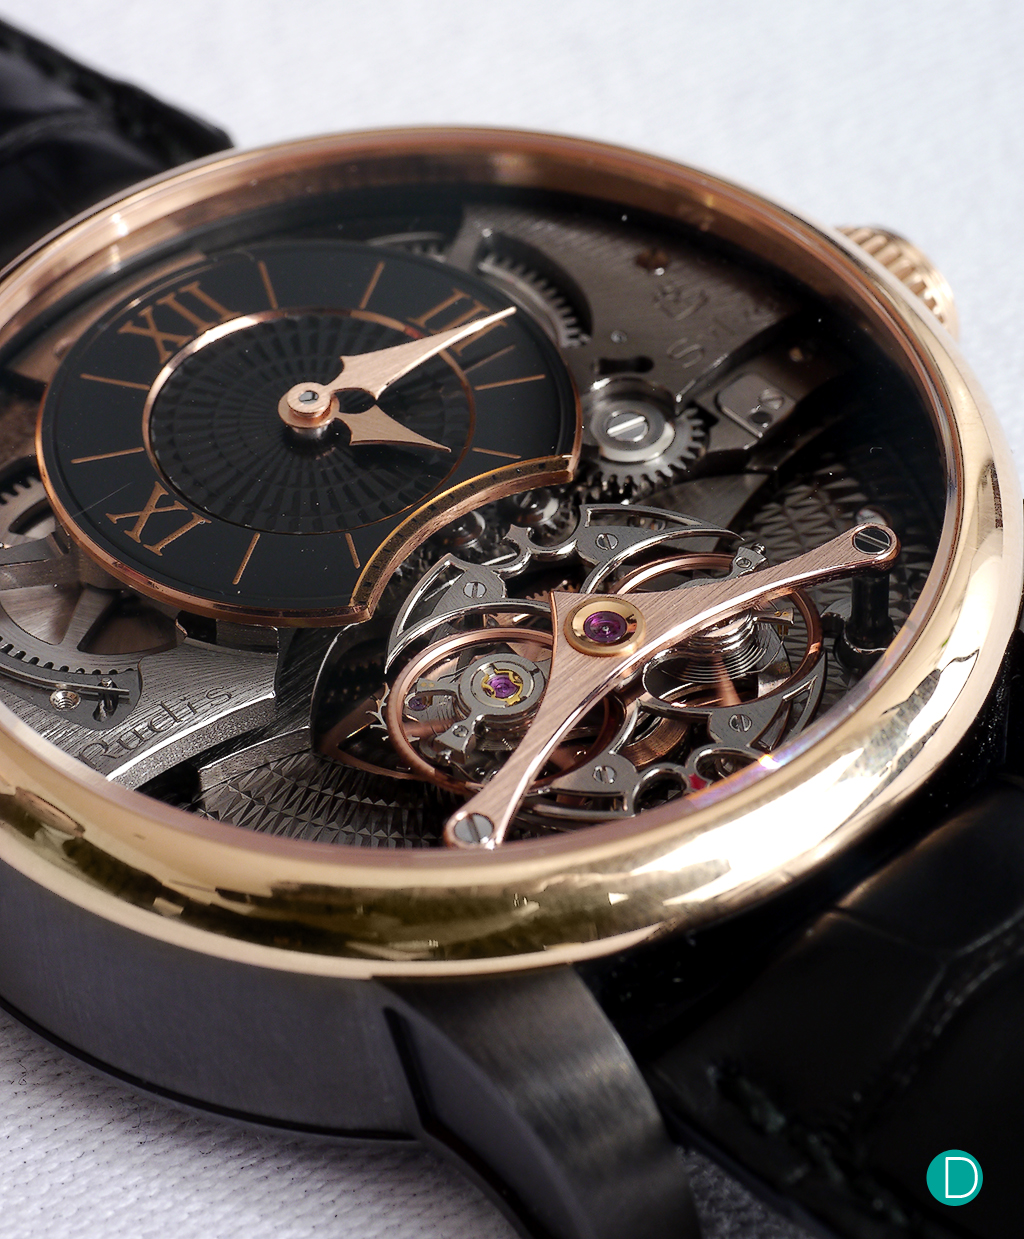 As a general rule, and as long as it is in a completely stable state, a tourbillon requires 1 minute to compensate for the effects of gravity. The Rudis Sylva Harmonious Oscillator enables instantaneous time correction in a vertical position by means of the interconnection of the balances and asymmetric deployment of the balance springs.